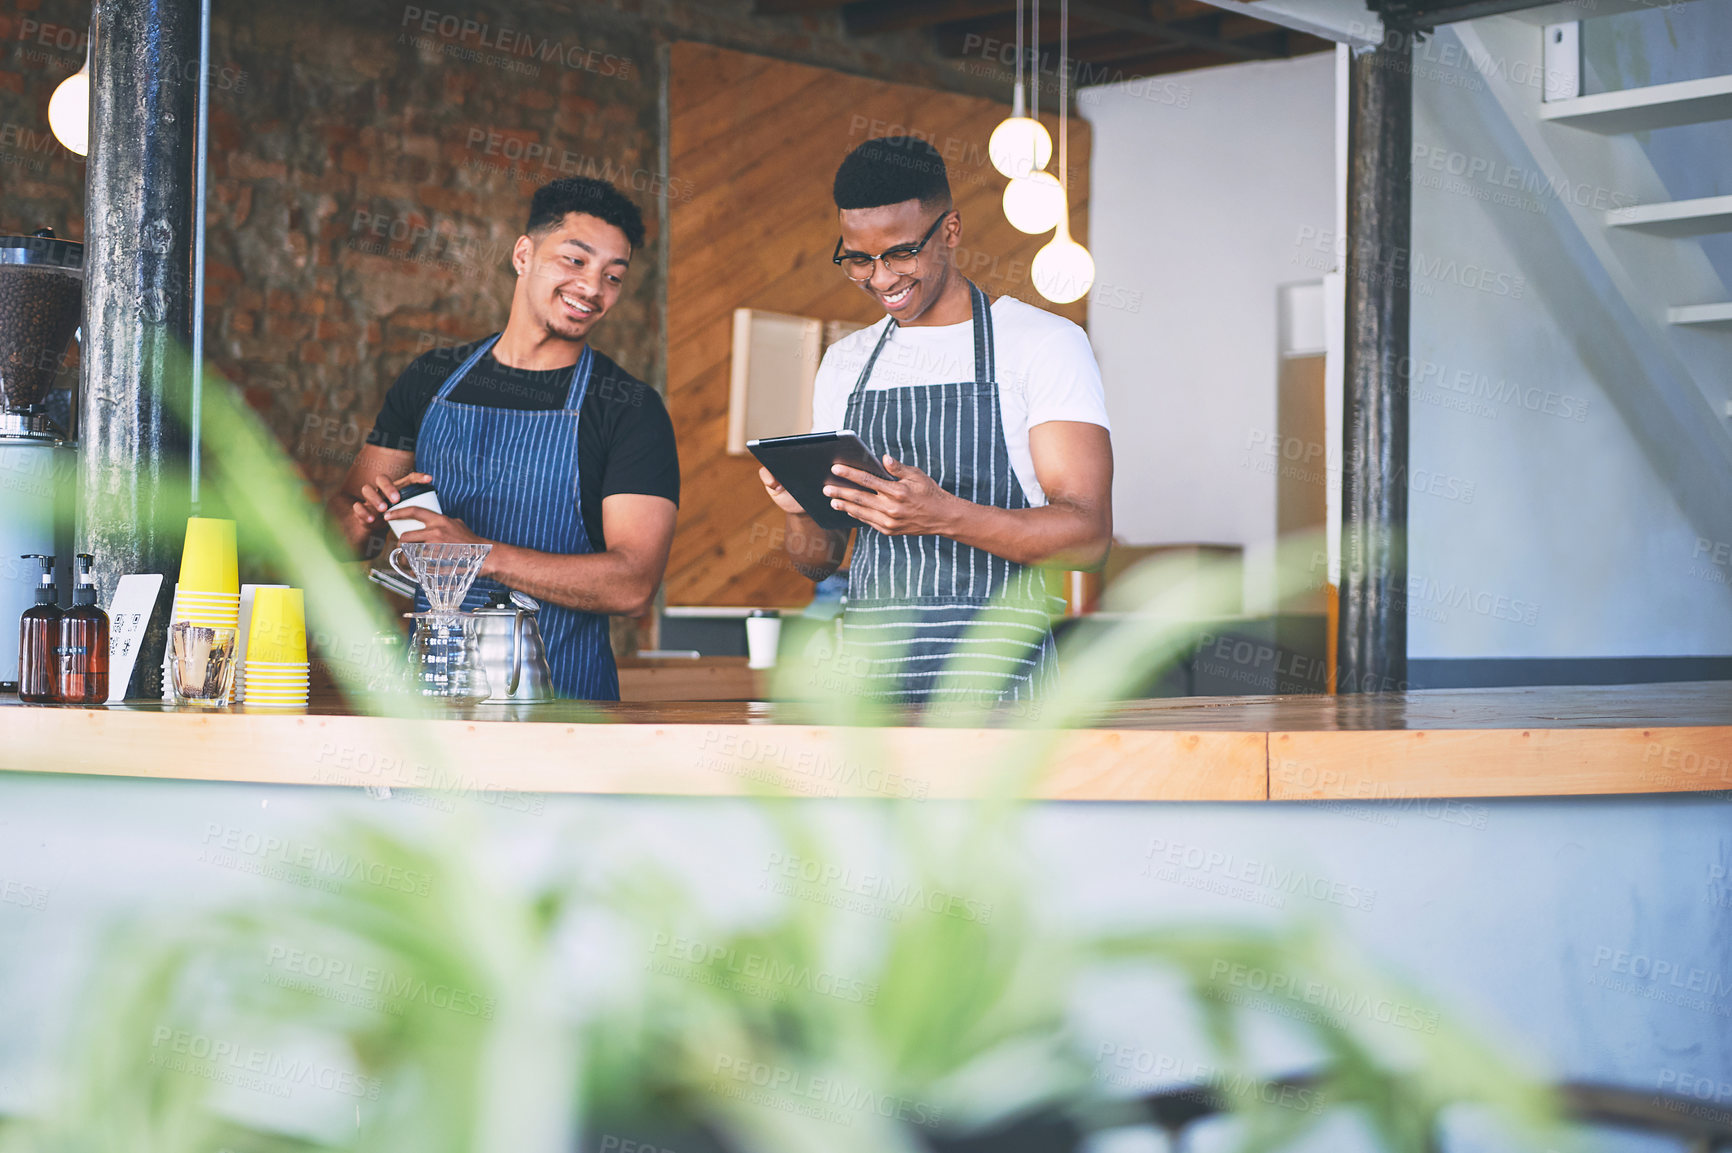 Buy stock photo Shot of two young men using a digital tablet while making coffee at a cafe